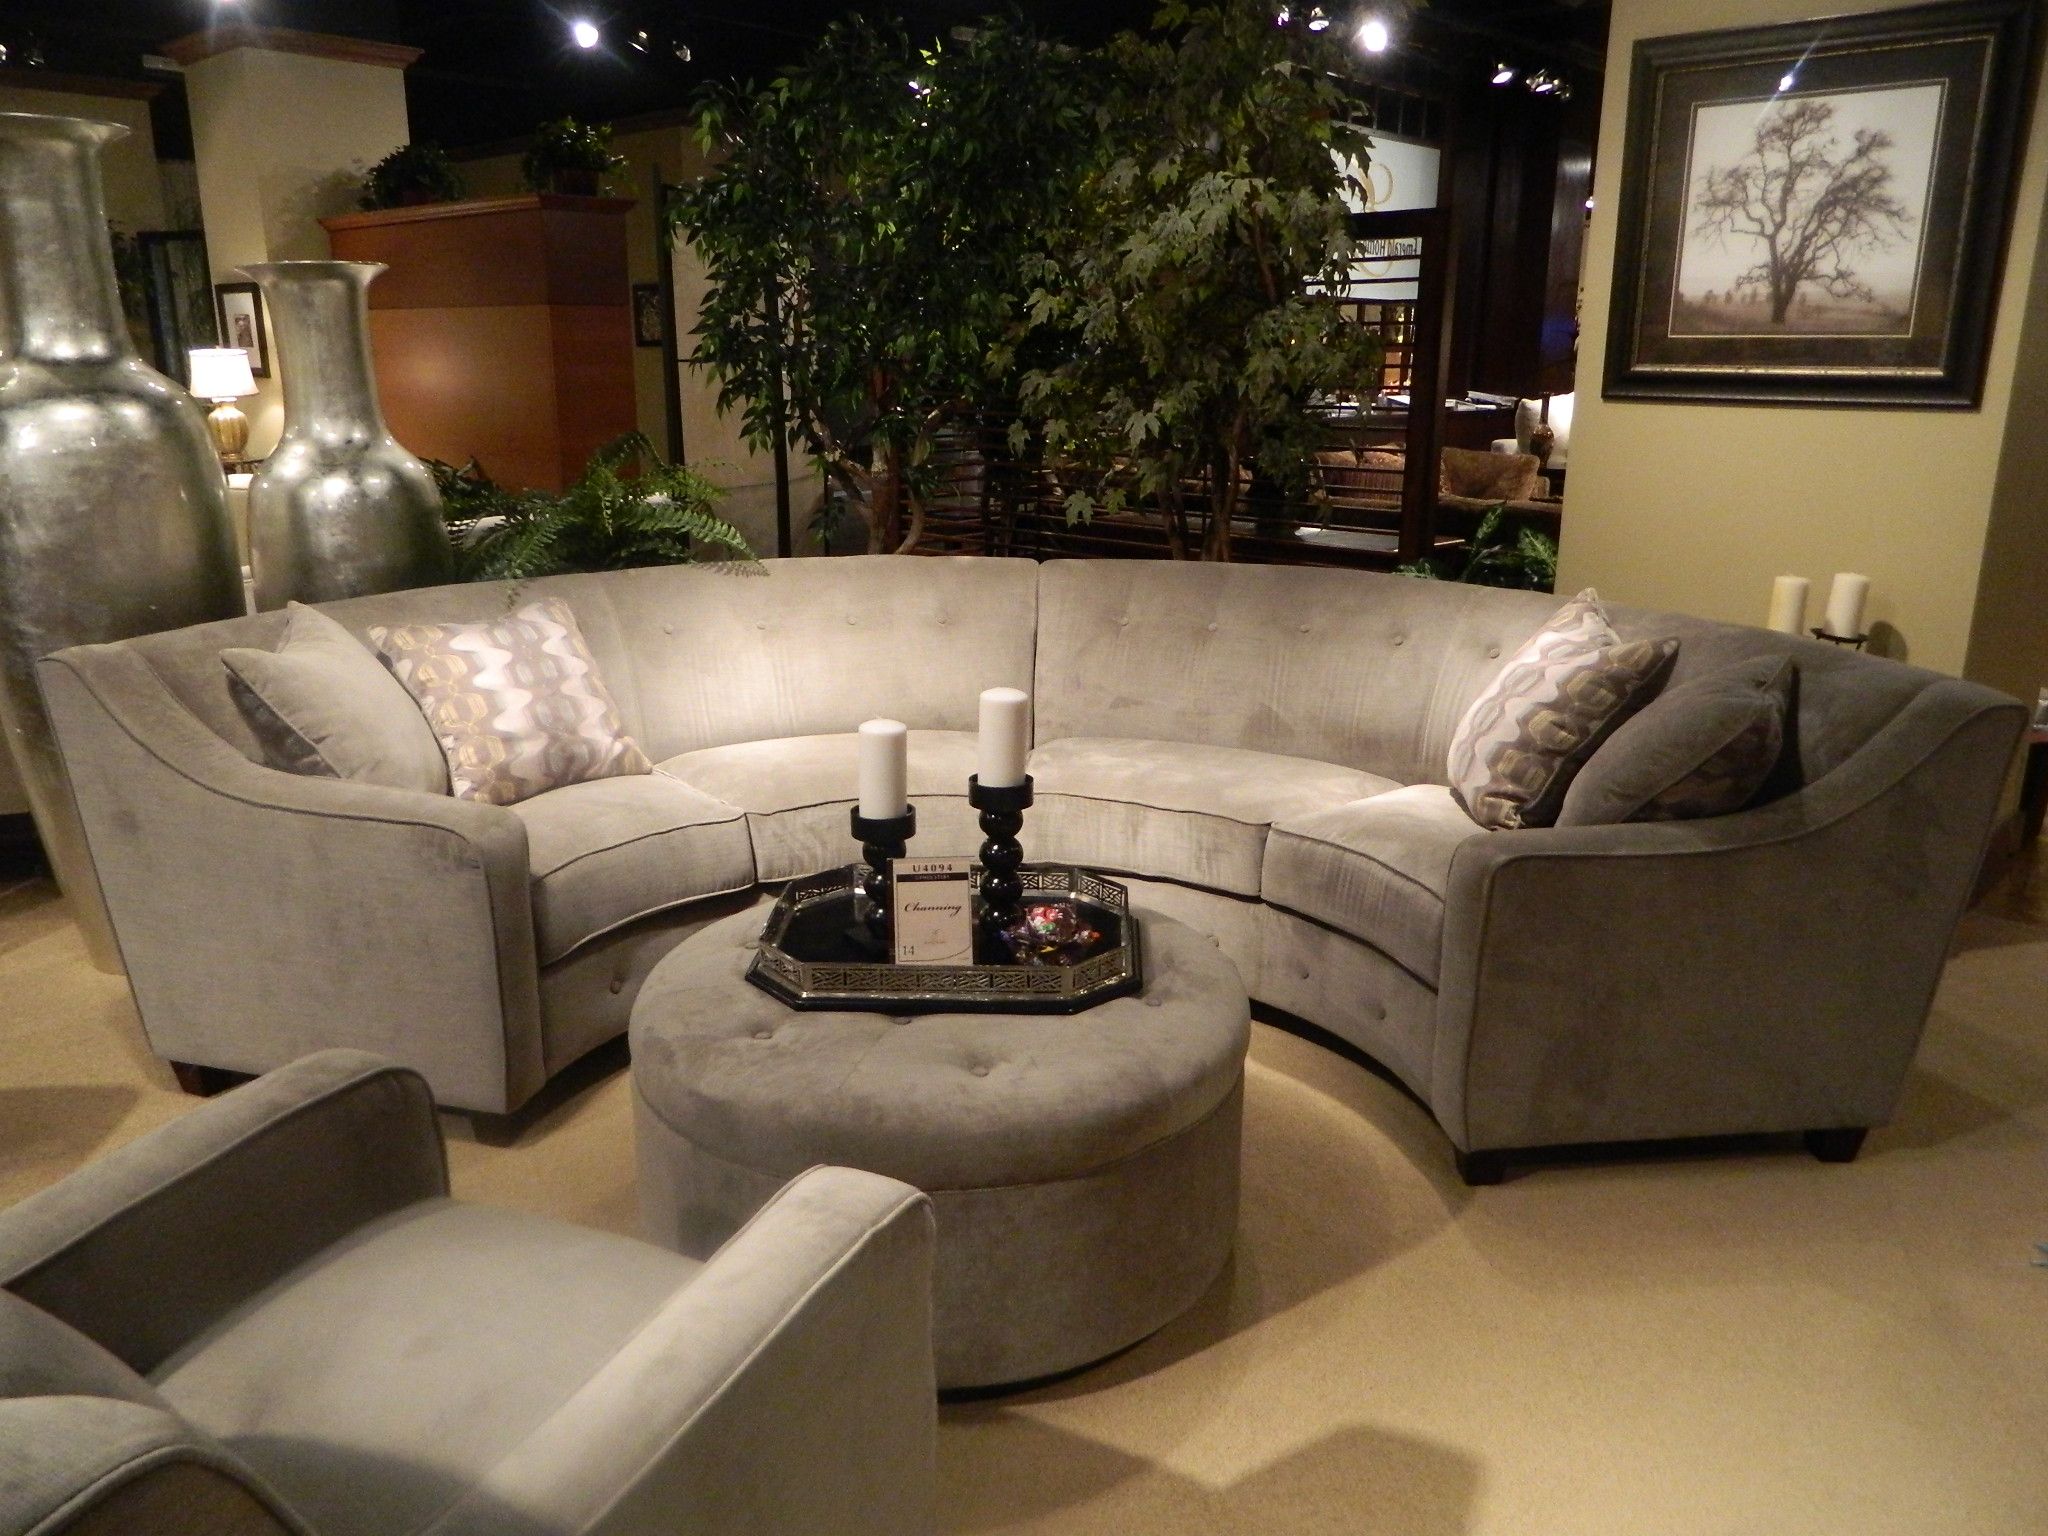 New Gray Silver Round Sectional. I loved this new 2013 sectional and  ottoman, great piece and also very affordable! Coming soon.